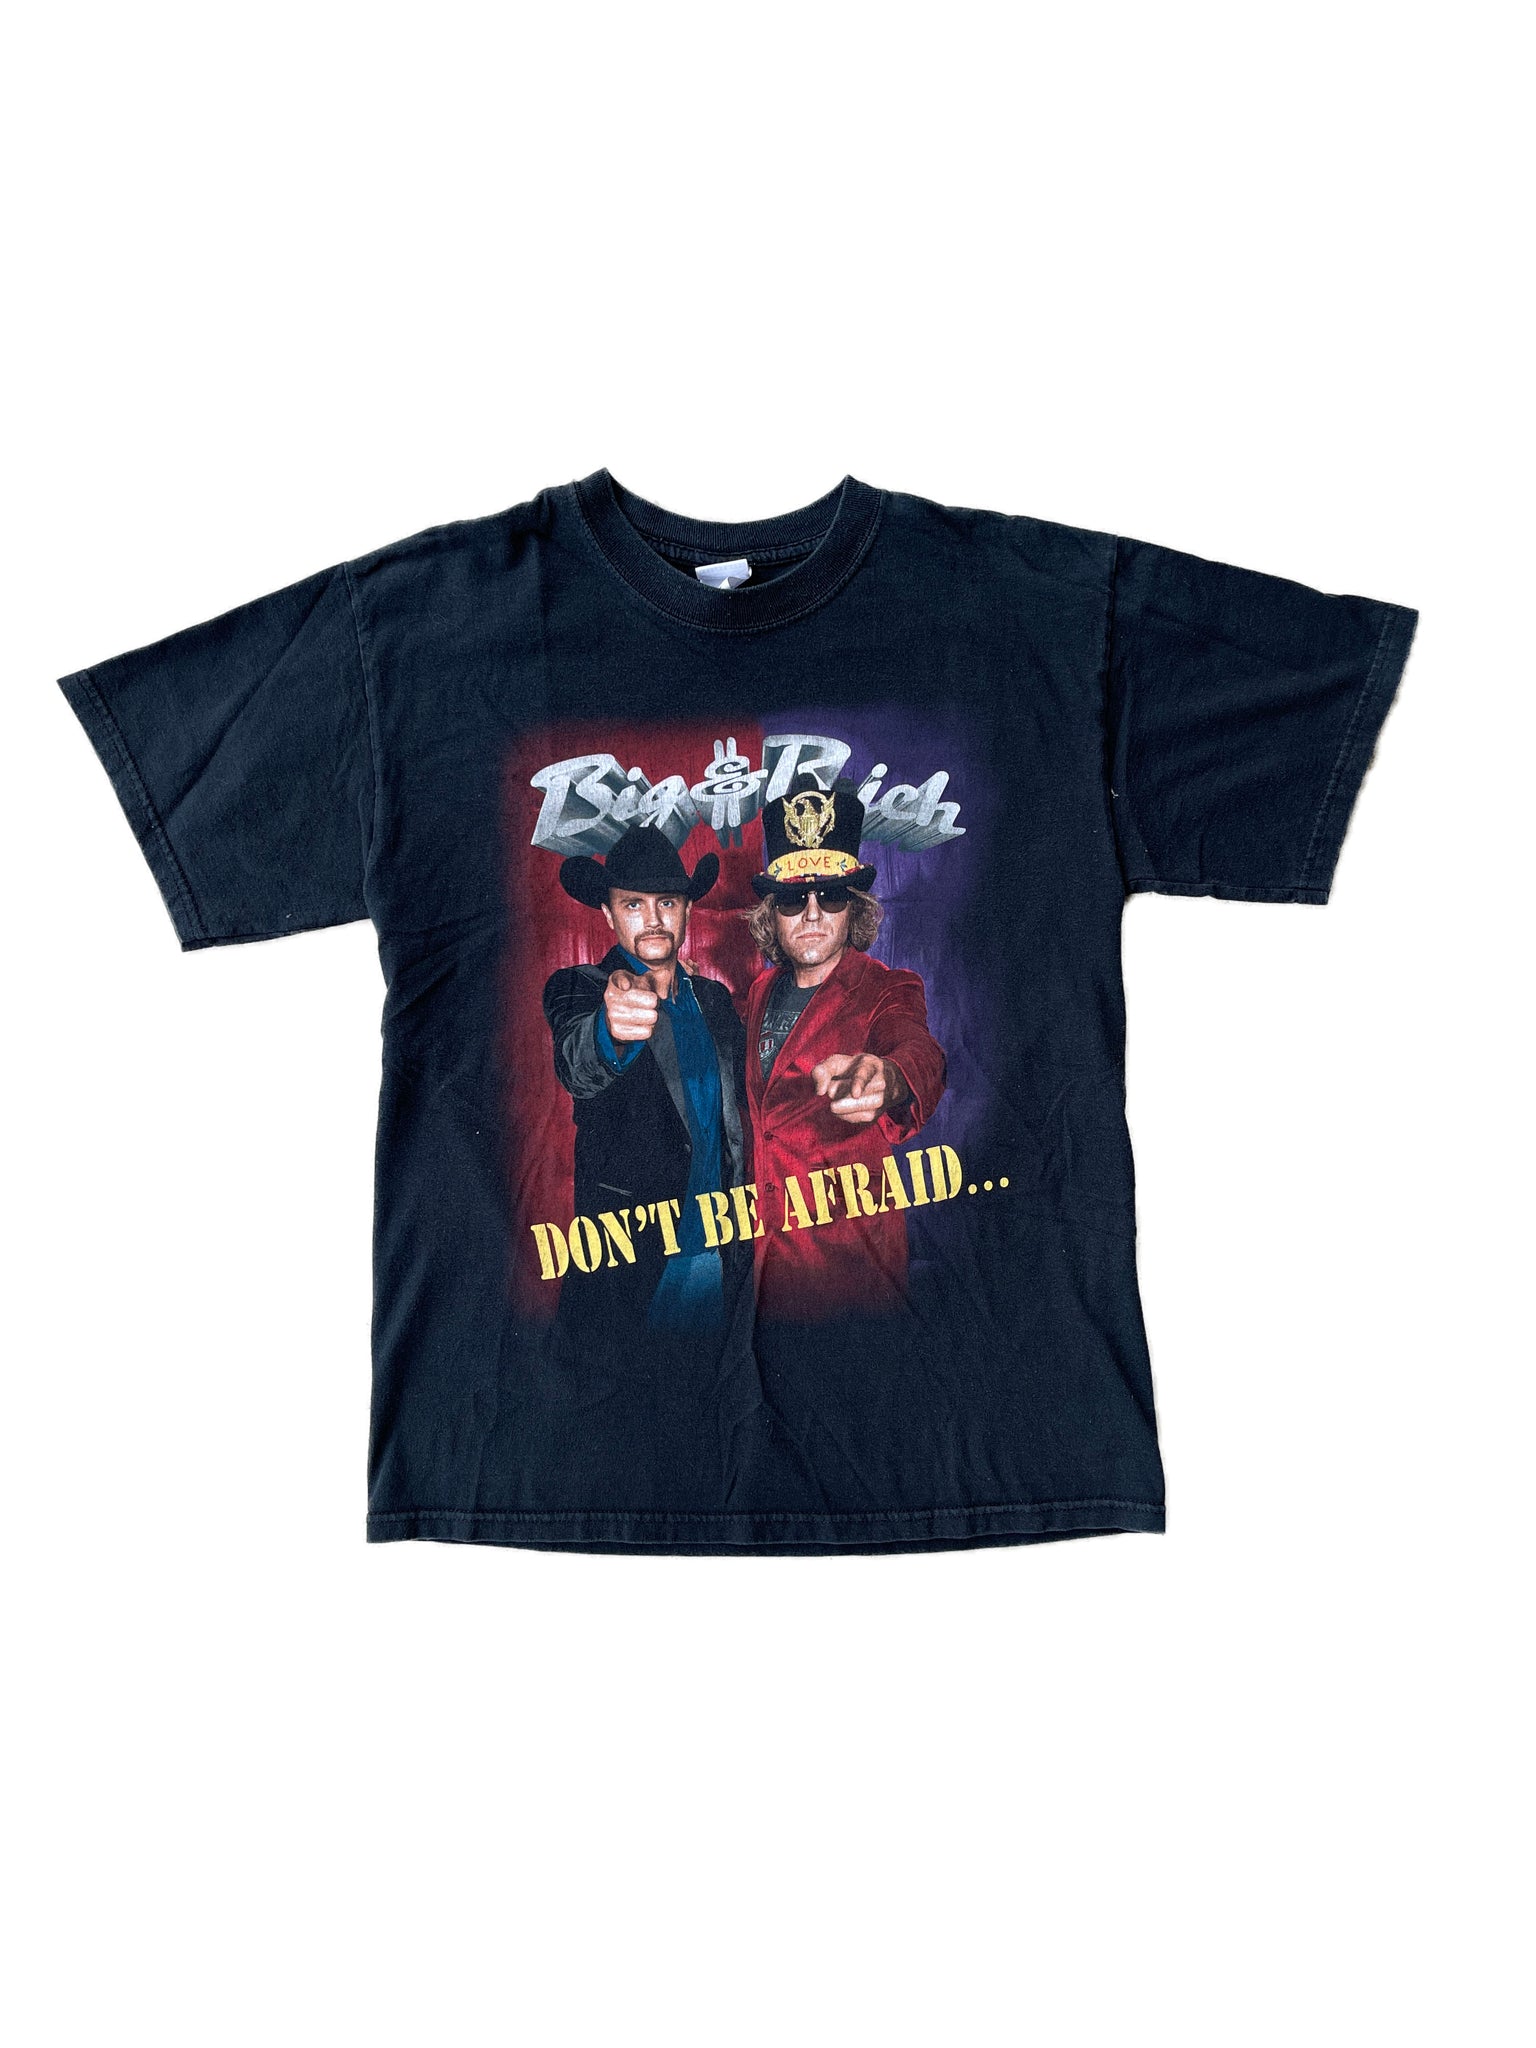 00s big and rich tee